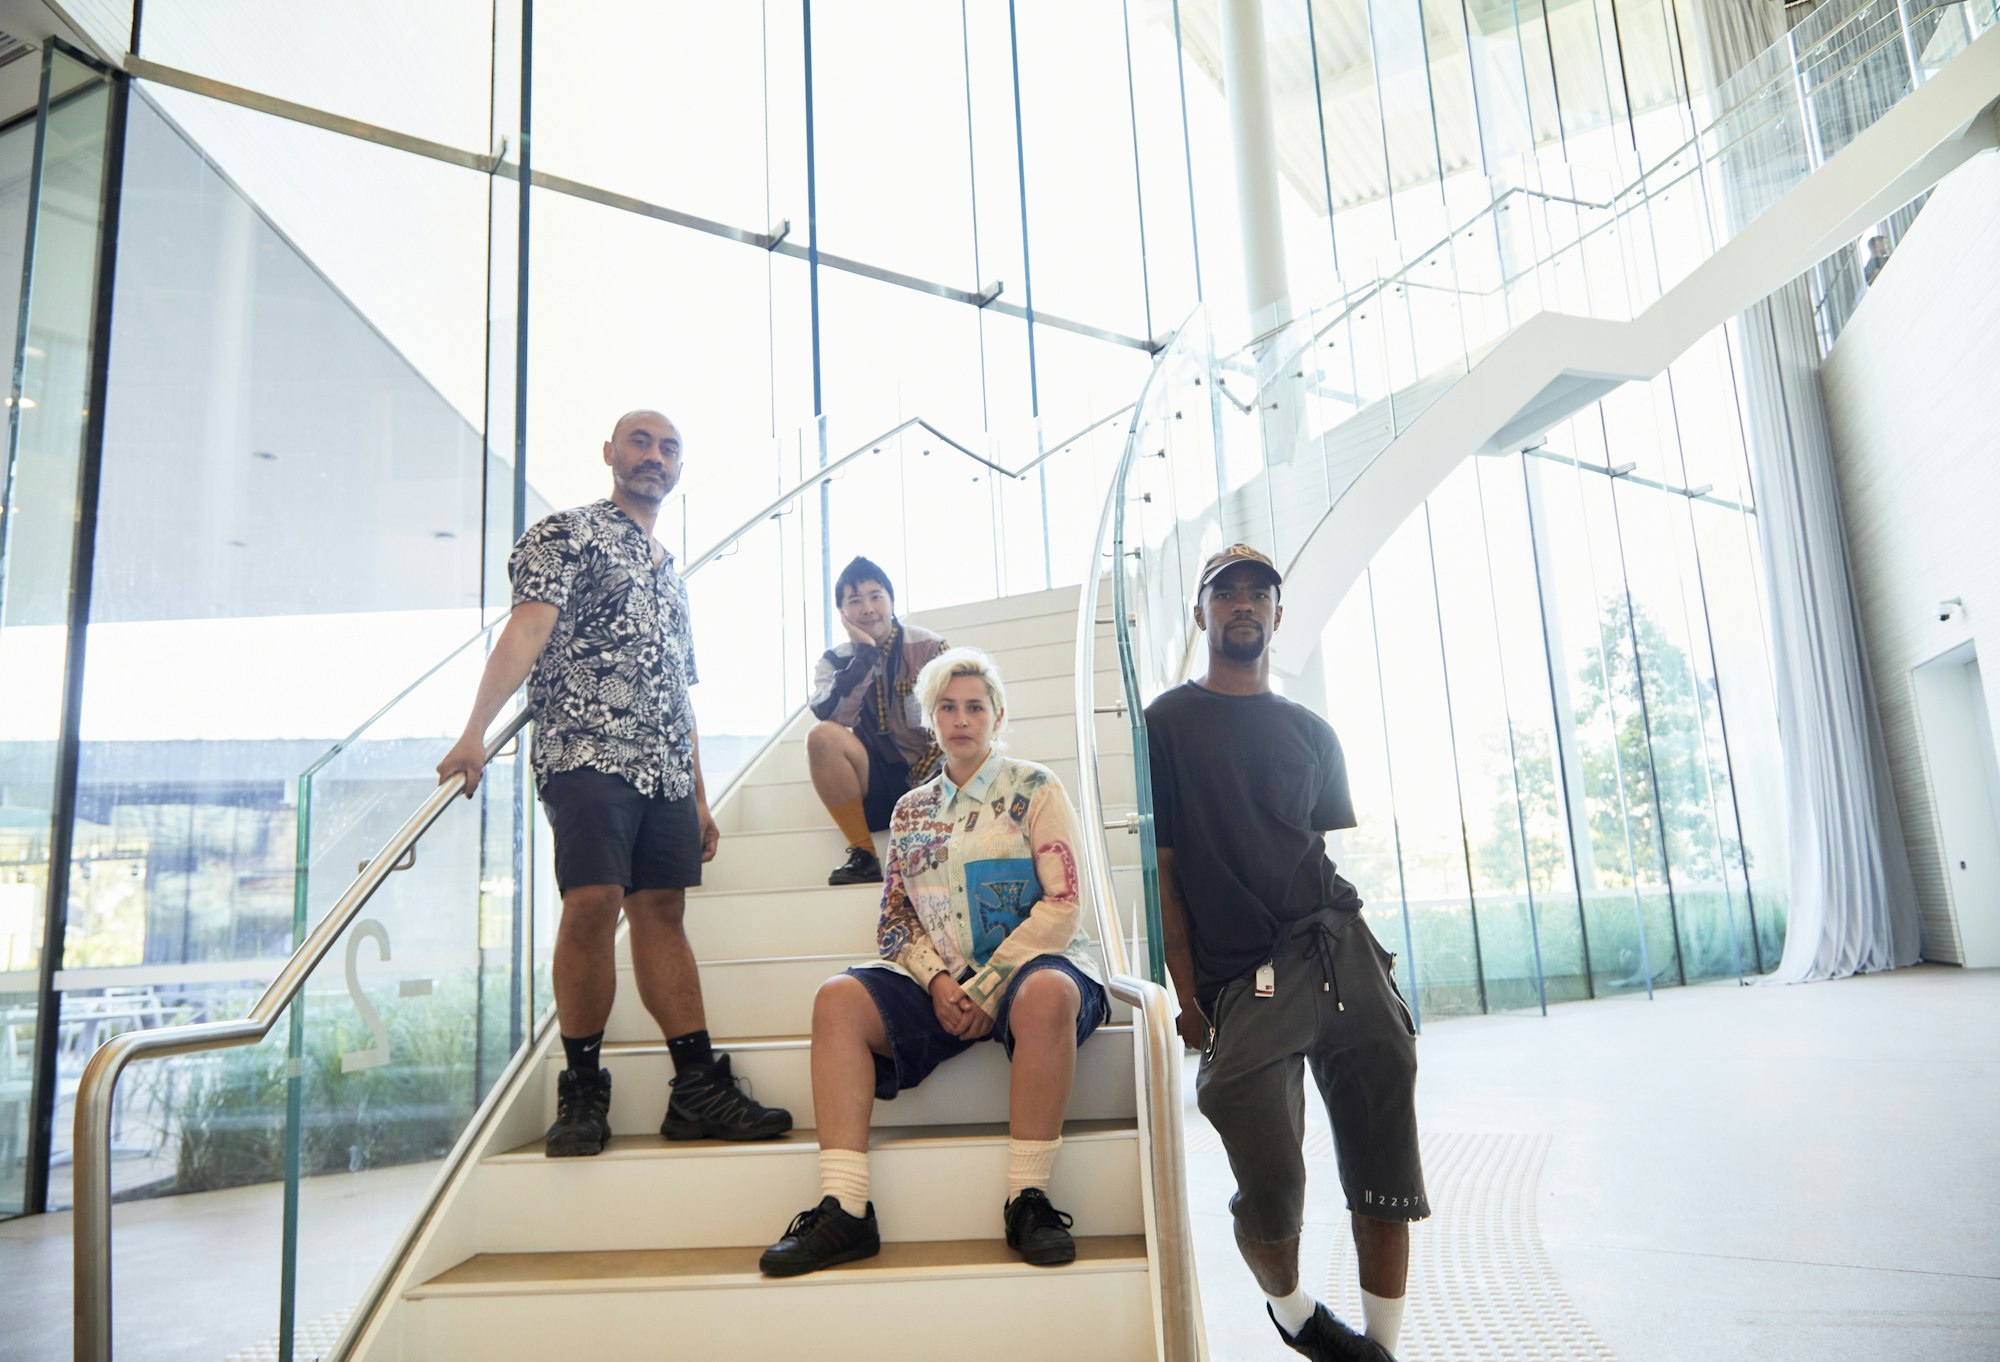 Four people standing and sitting on a staircase, looking directly into the camera.